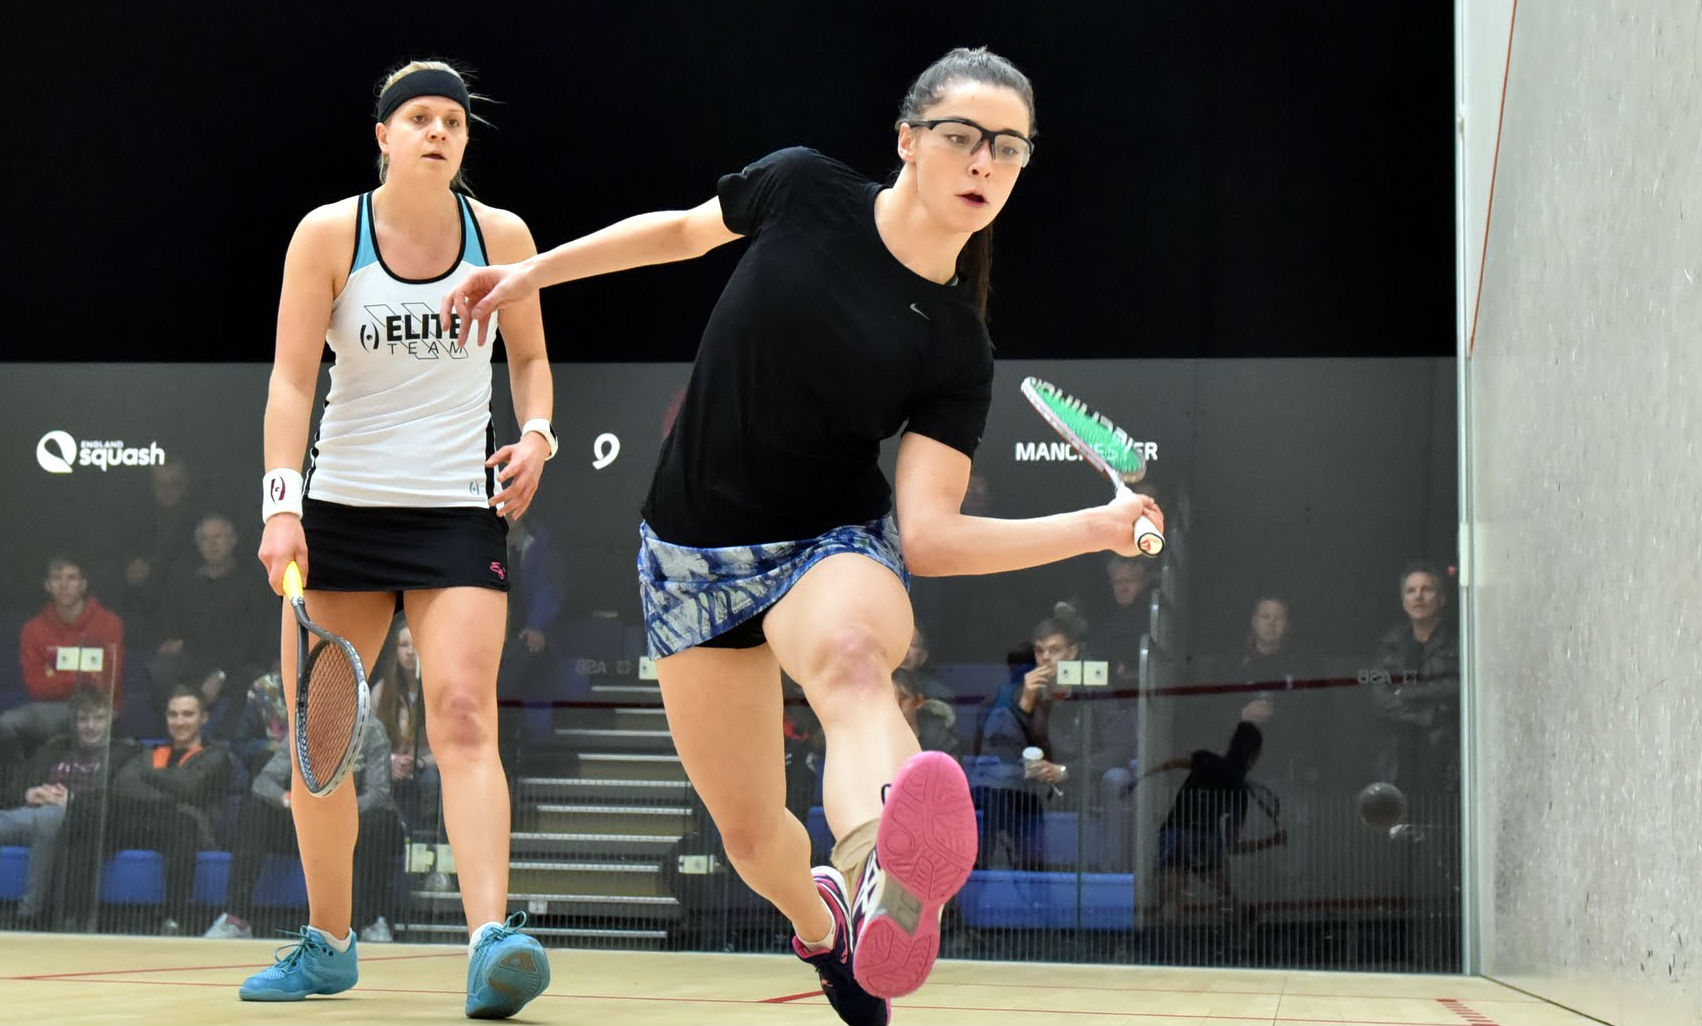 Jasmine Hutton (fore) playing against Sarah Jane Perry